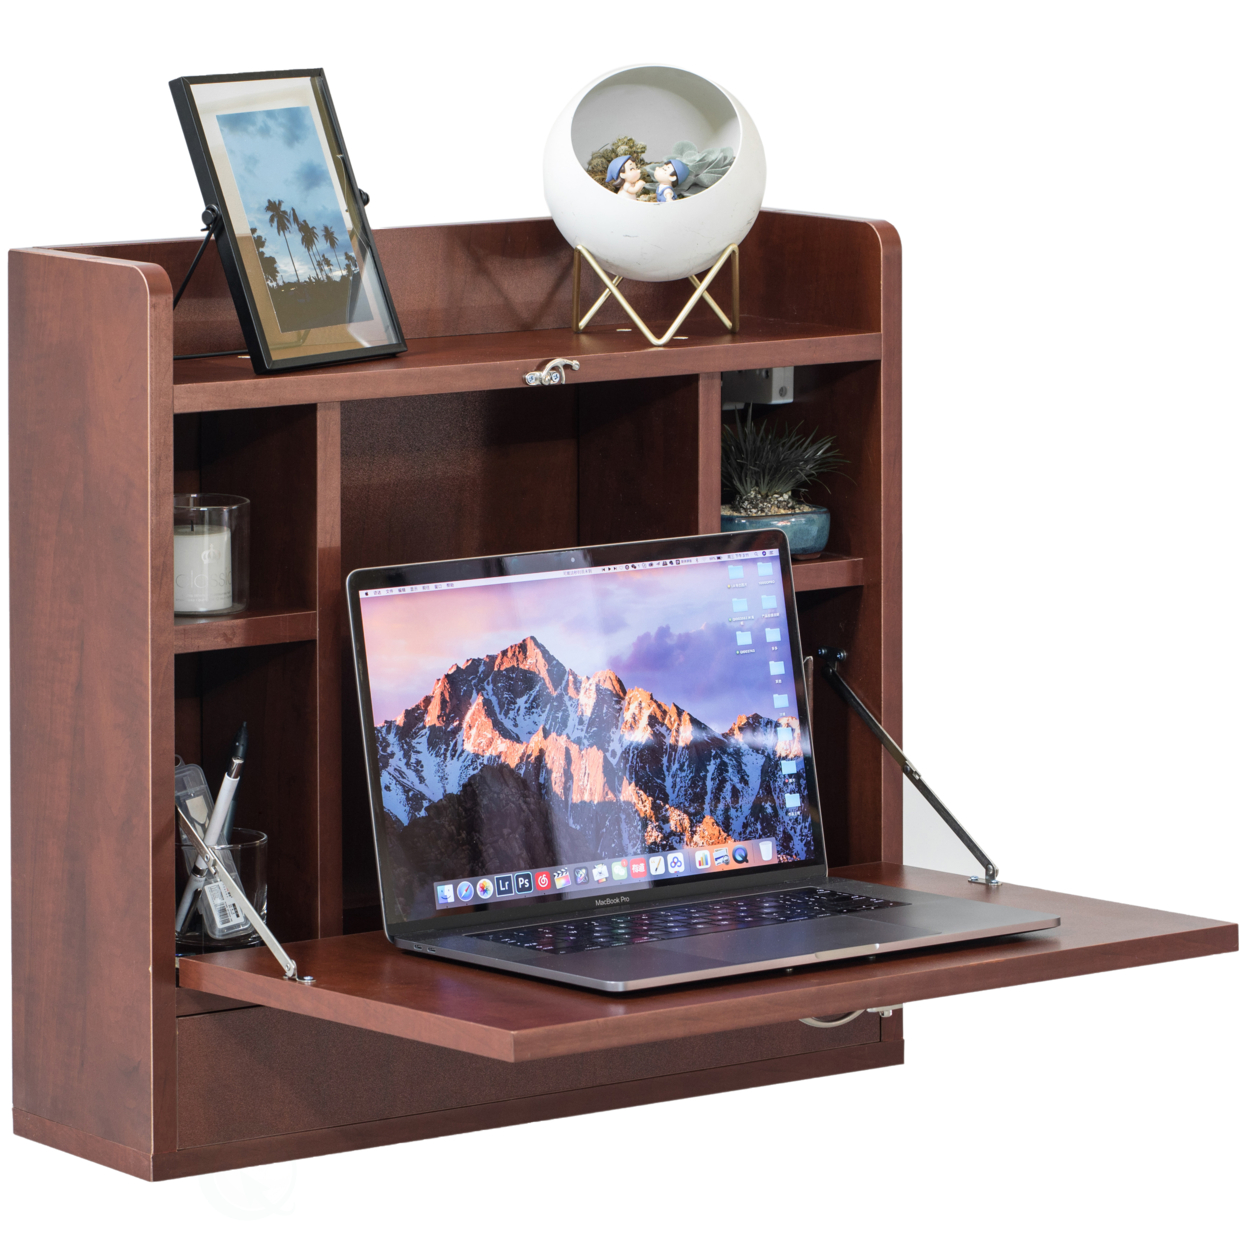 Wall Mount Folding Laptop Writing Computer Or Makeup Desk With Storage Shelves And Drawer - Cherry